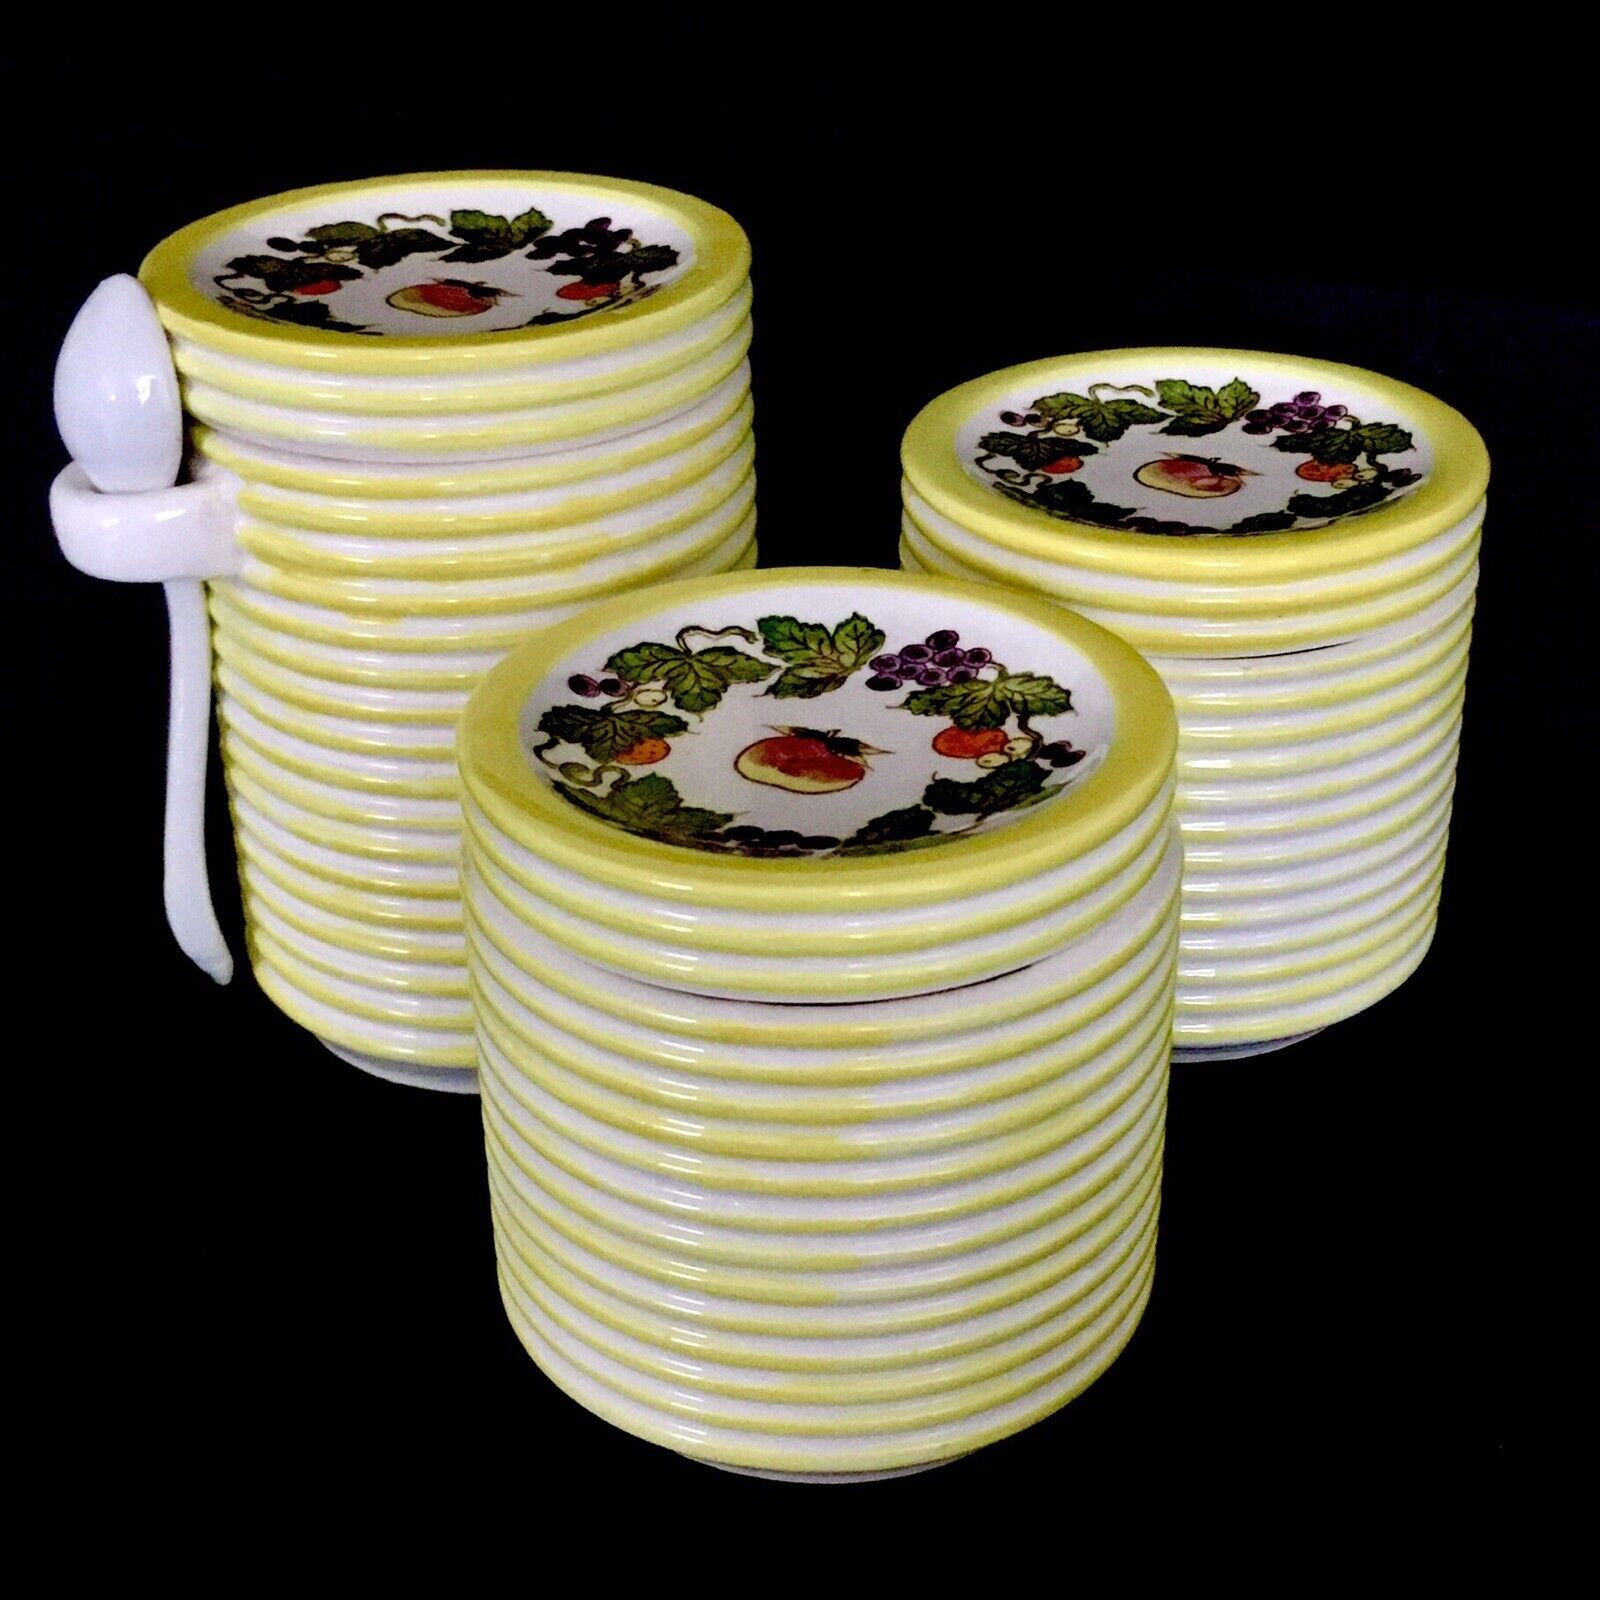 Vintage 1940s Canister Set of 3 Ceramic Yellow White Stripped Japan Fruits Print